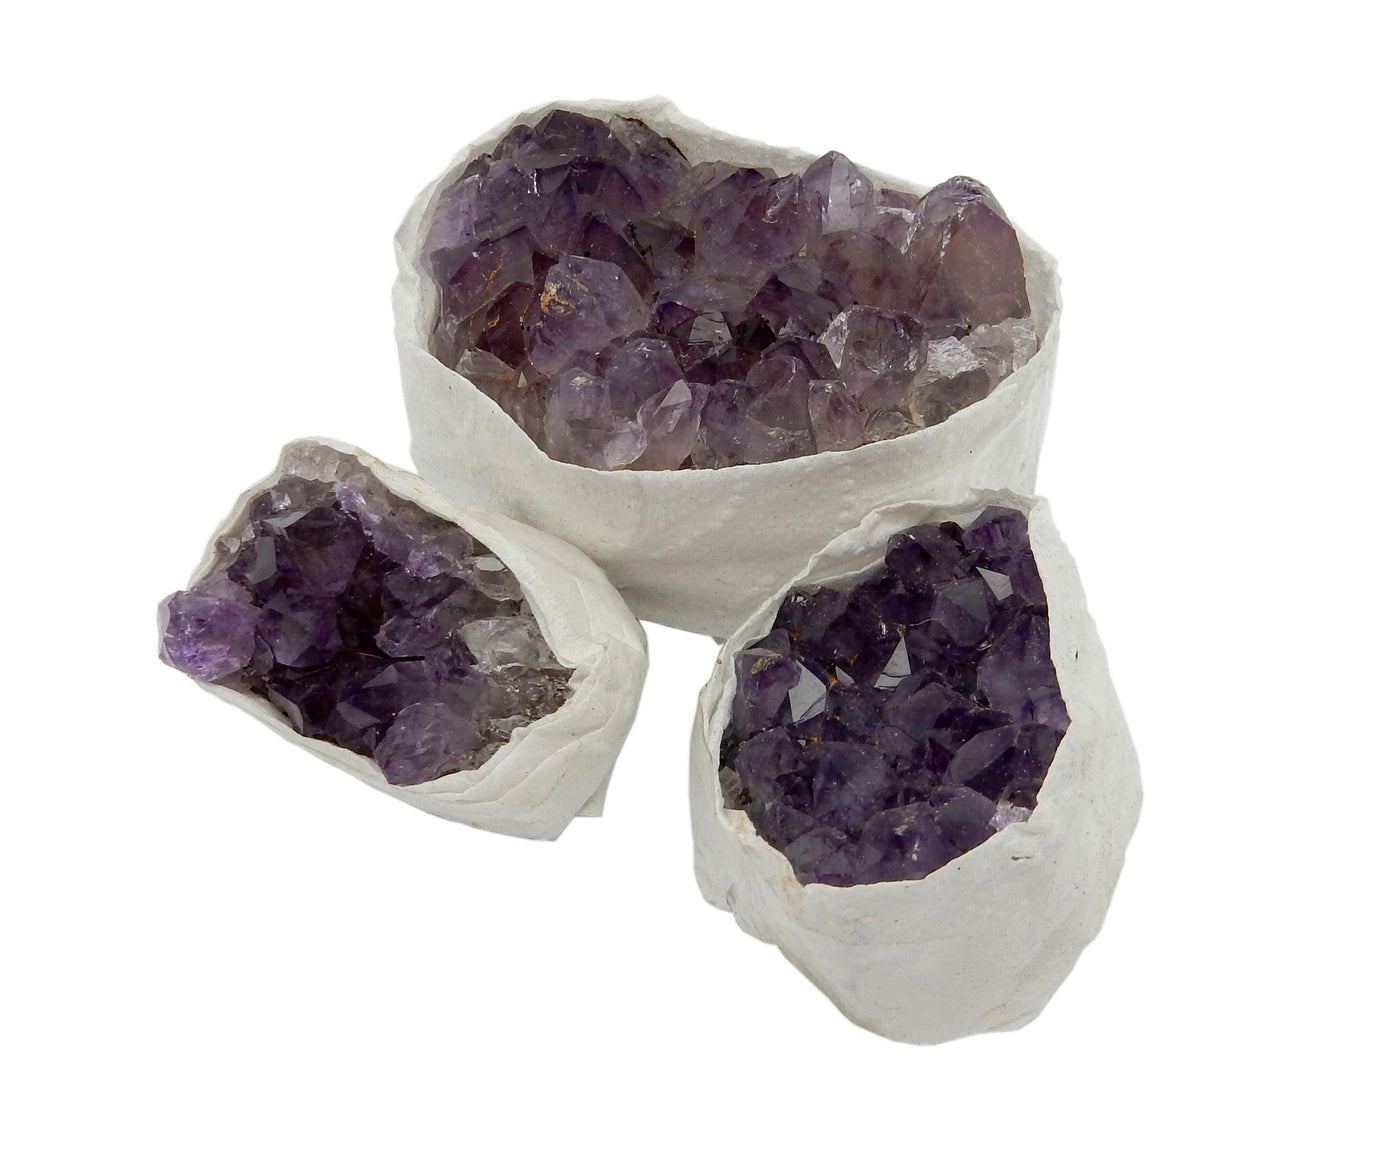 3 Amethyst Druzy Clusters showing varying size